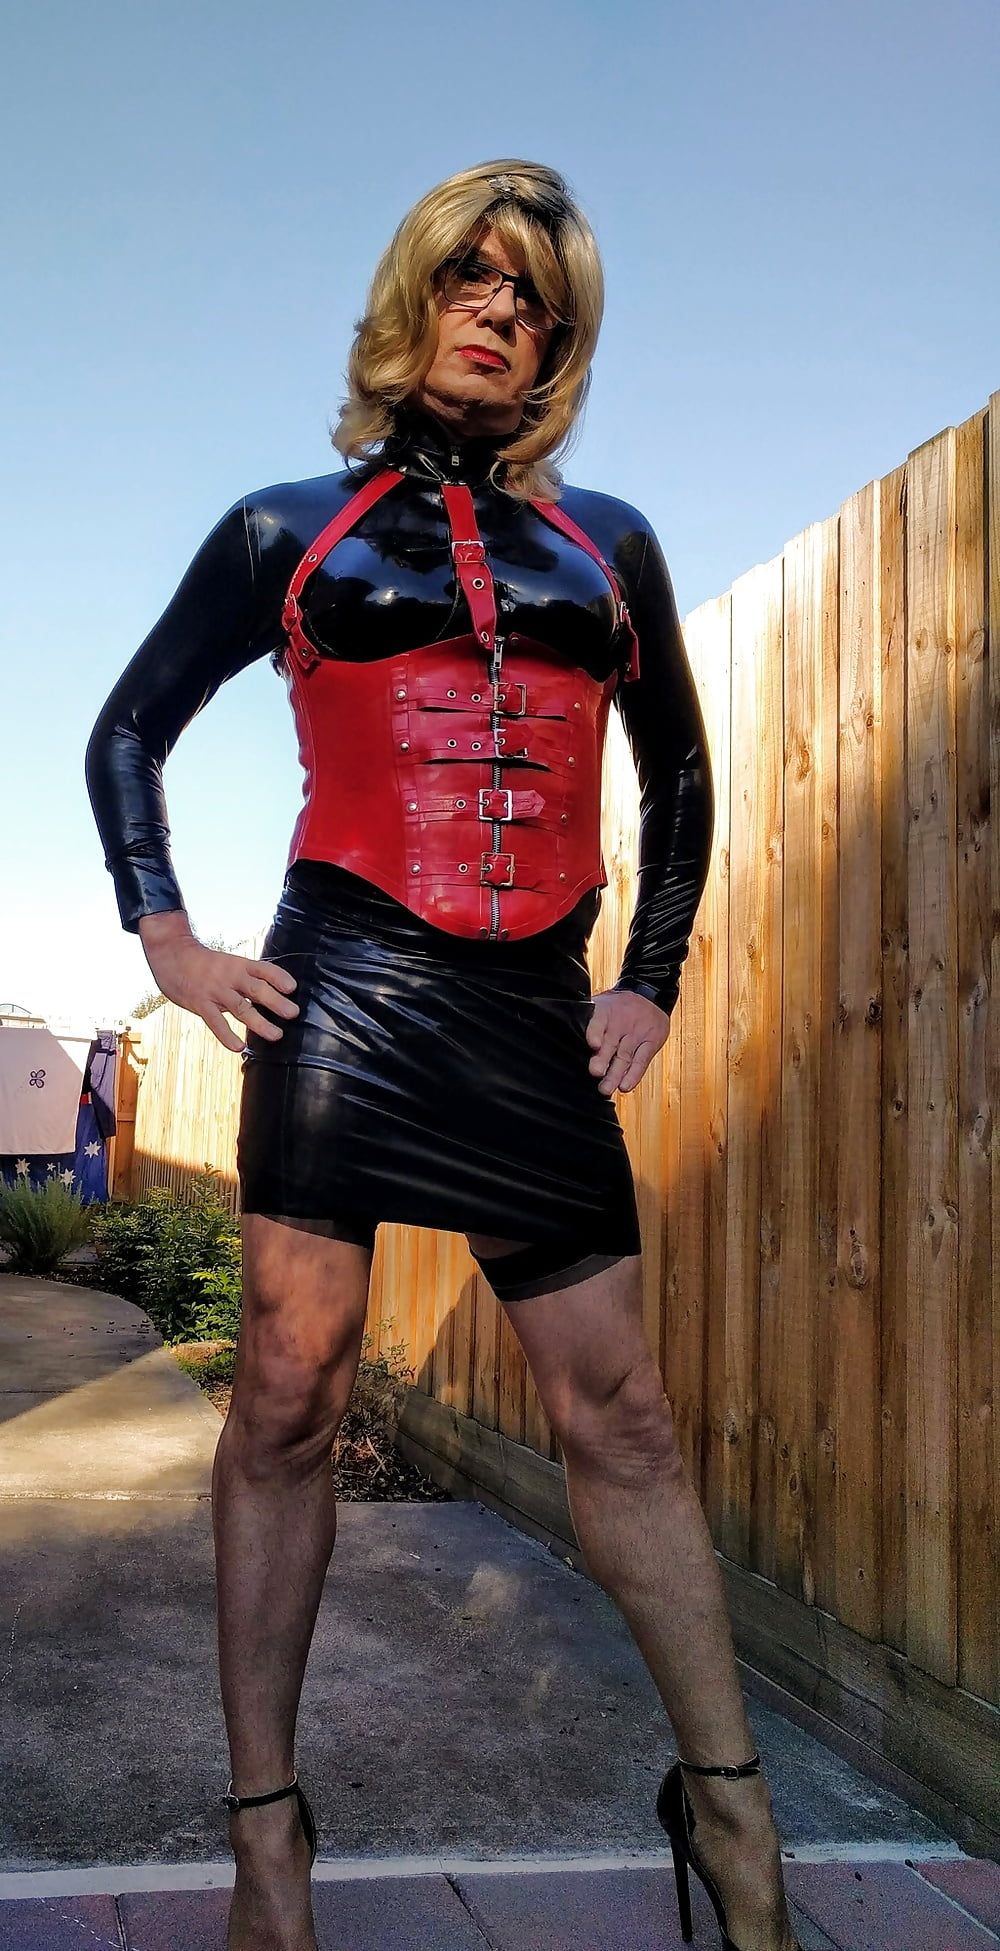 New latex skirt on a sunny Melbourne day #7